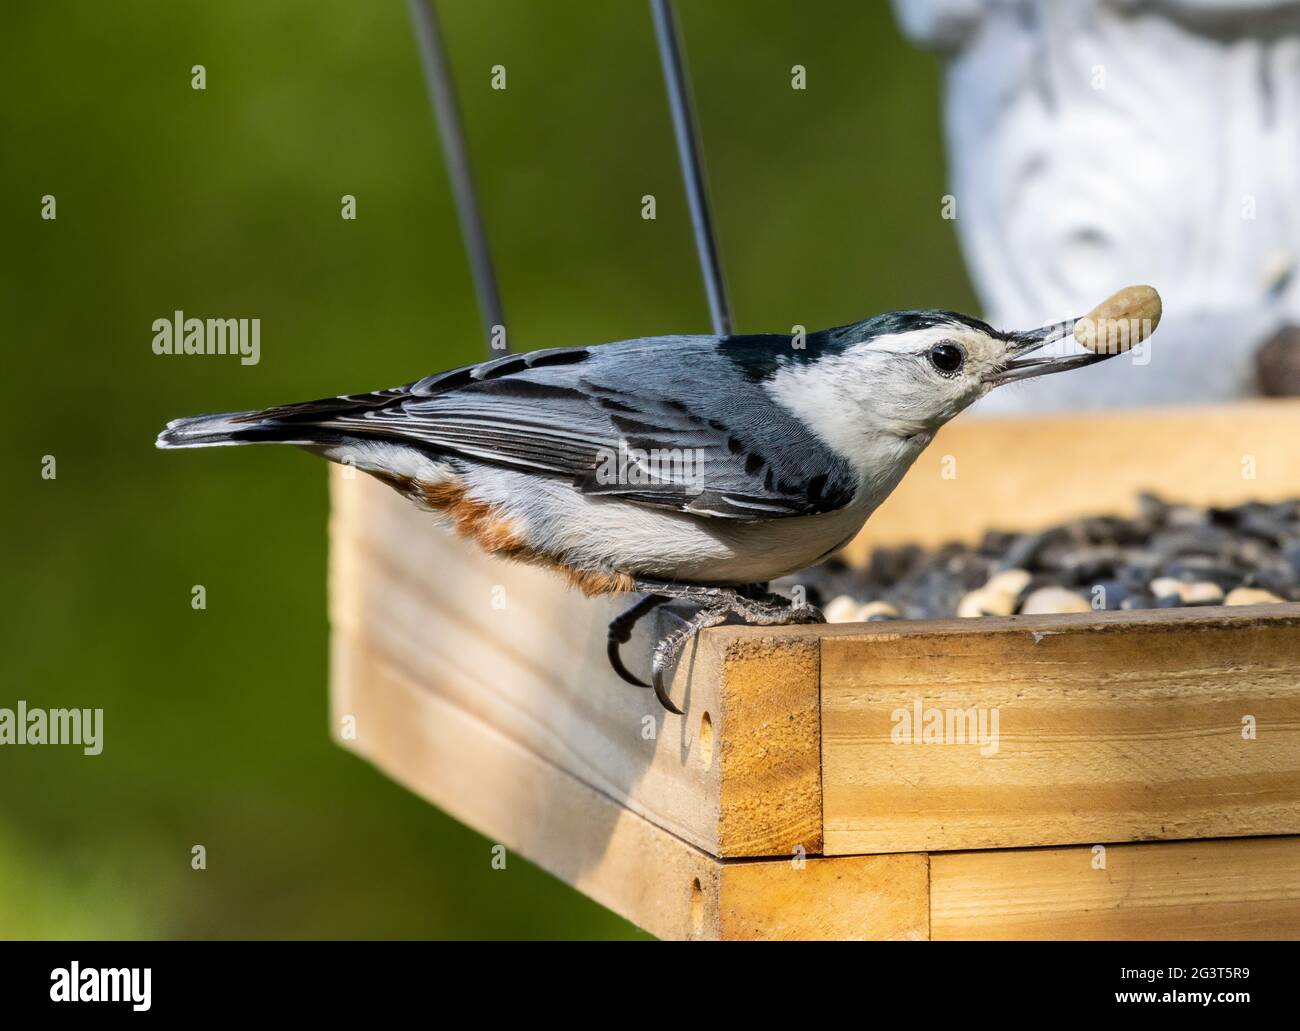 White Breasted Nuthatch With Peanut in Beak Perched On Feeder Sitta carolinensis Stock Photo